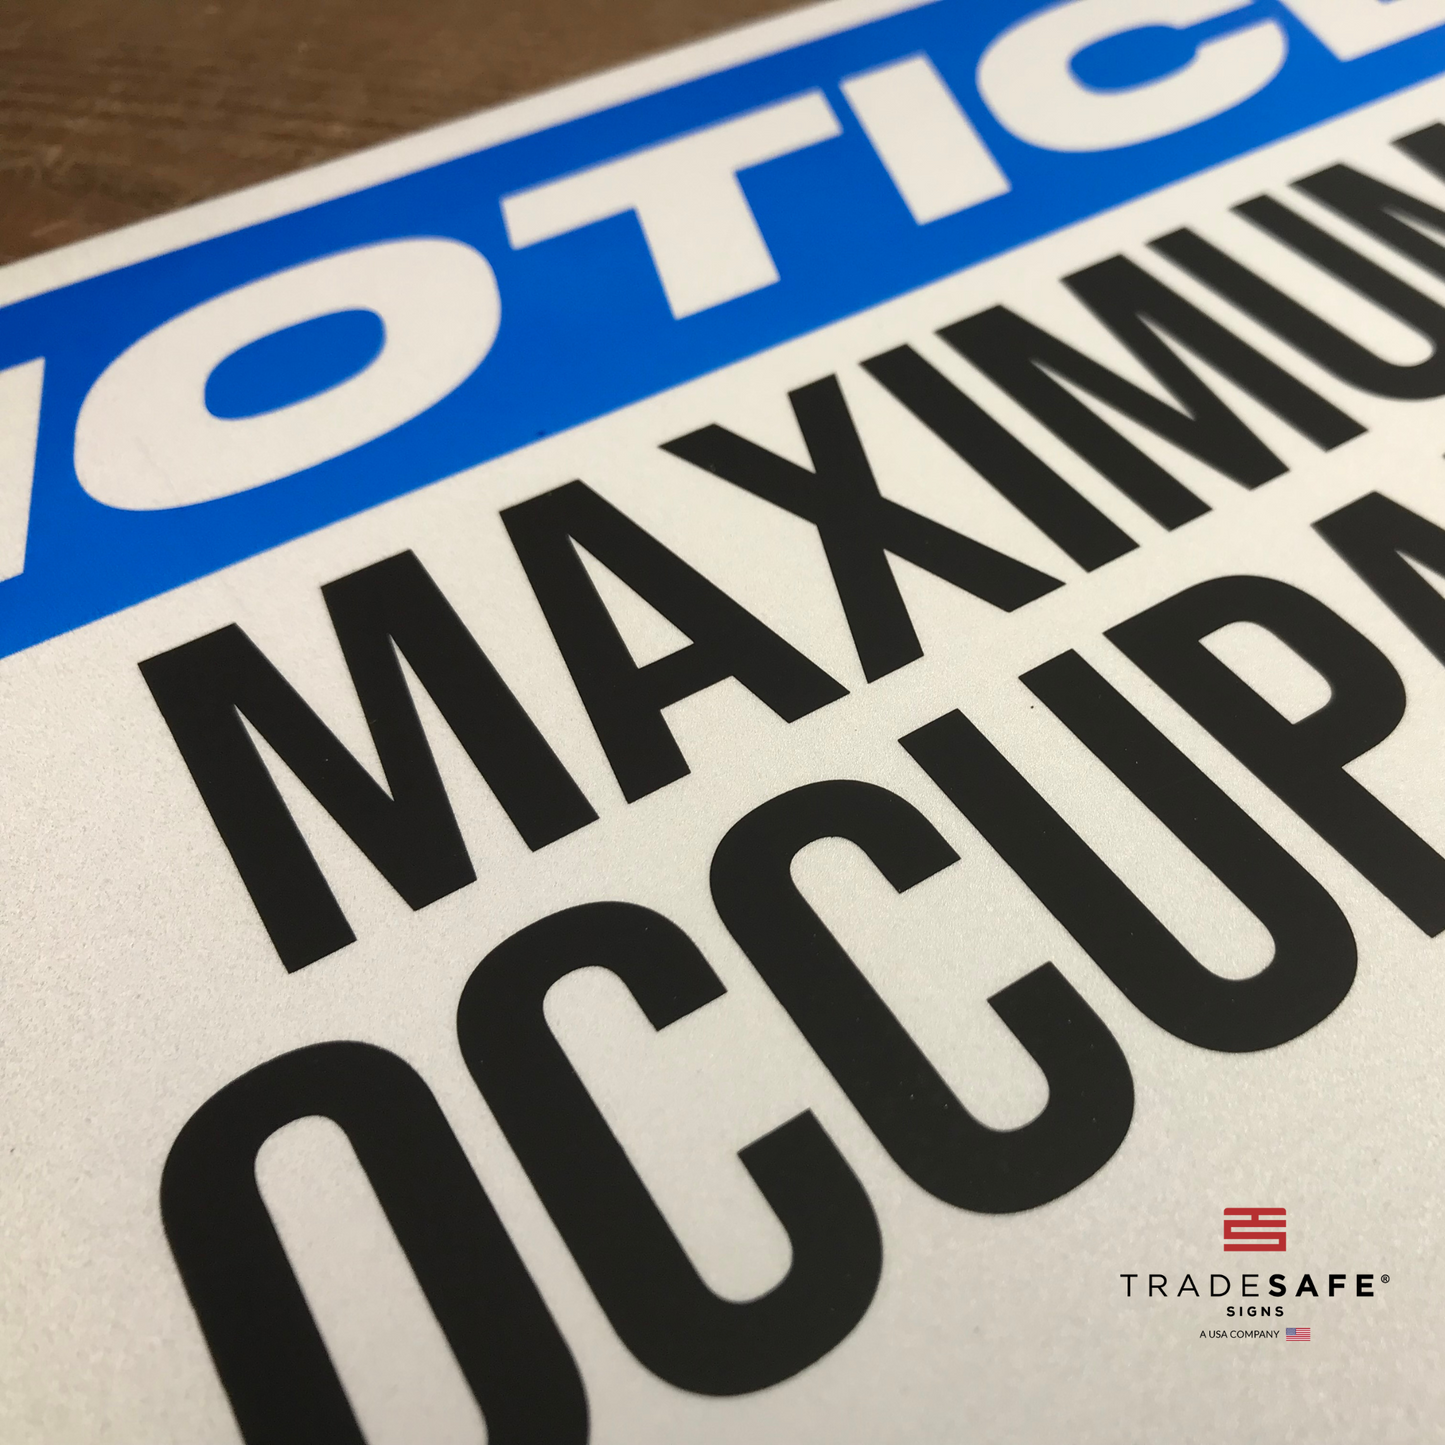 vibrant and highly visible notice maximum occupancy sign